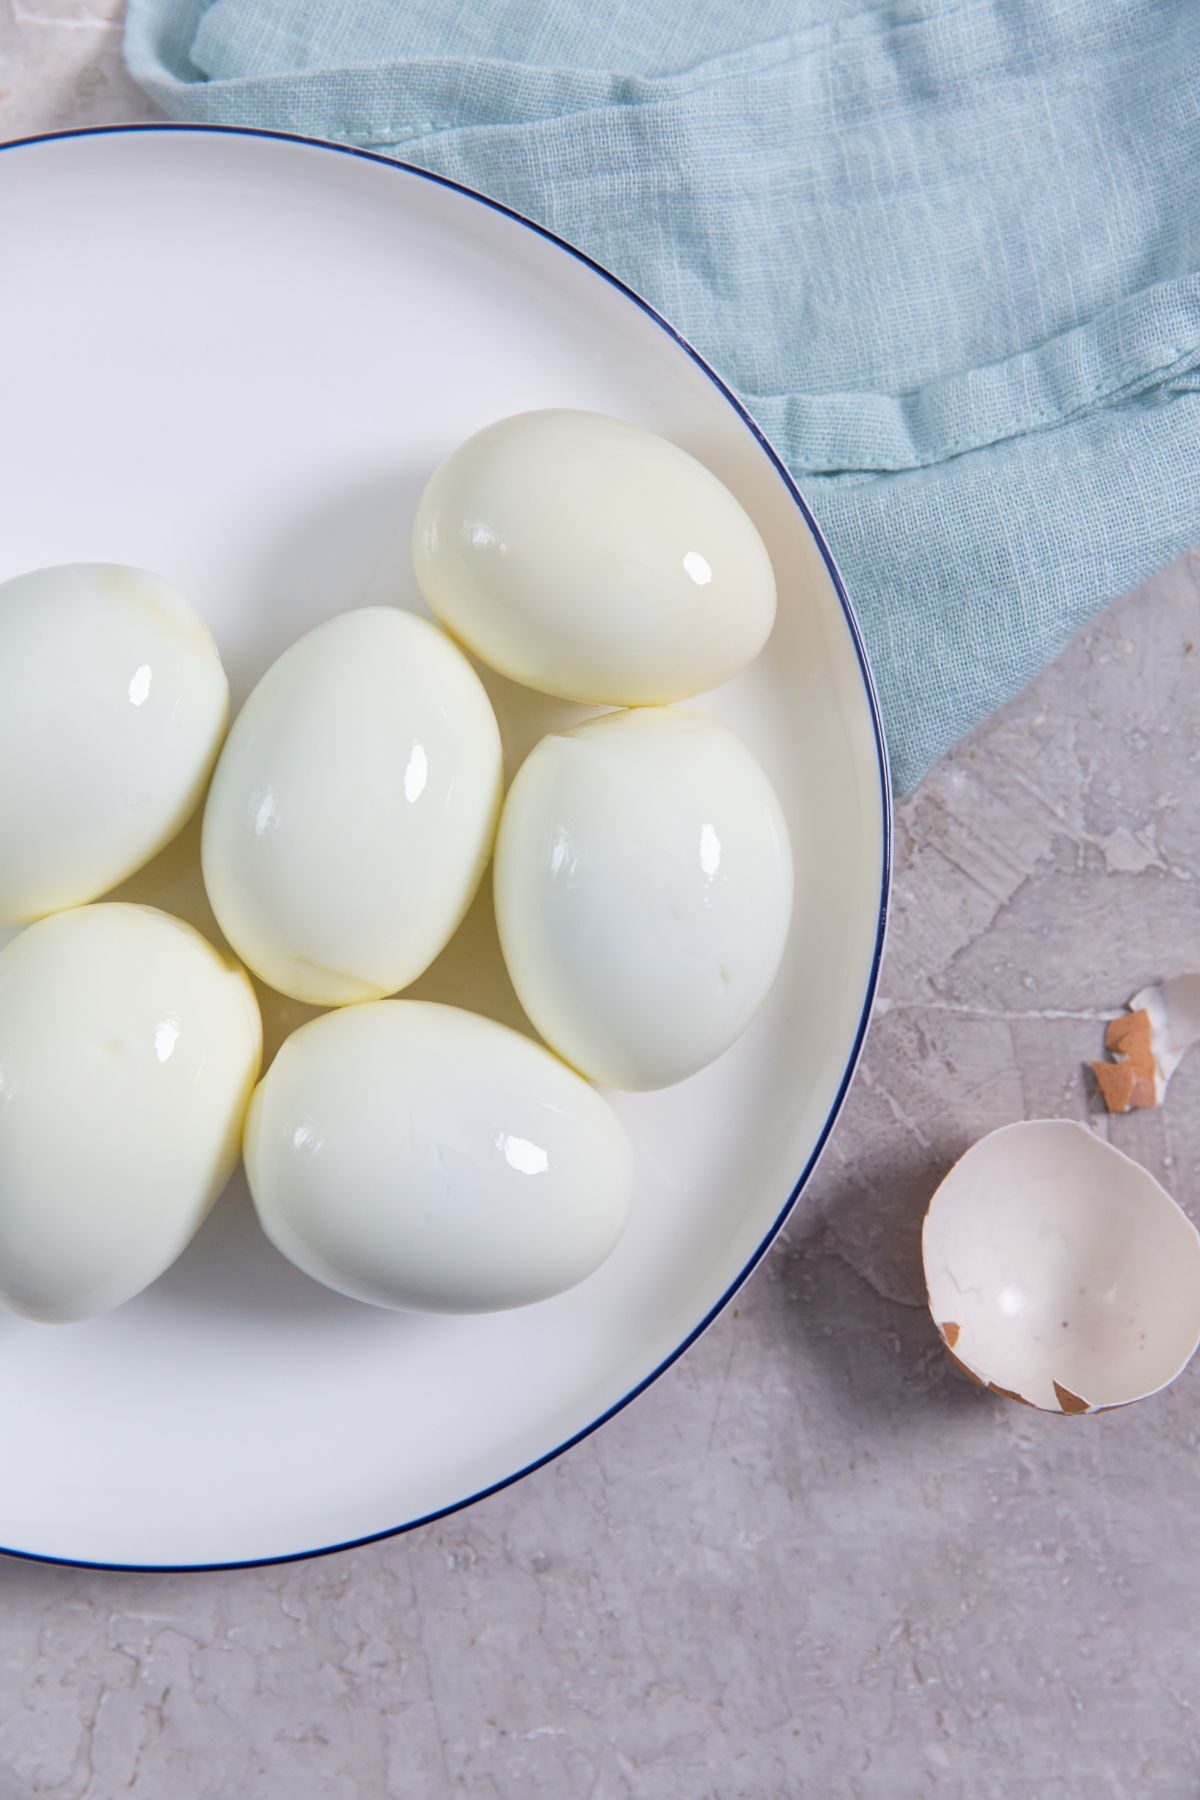 Instant Pot Eggs 5-5-5 Method on a white plate with a light blue napkin and shells on the side